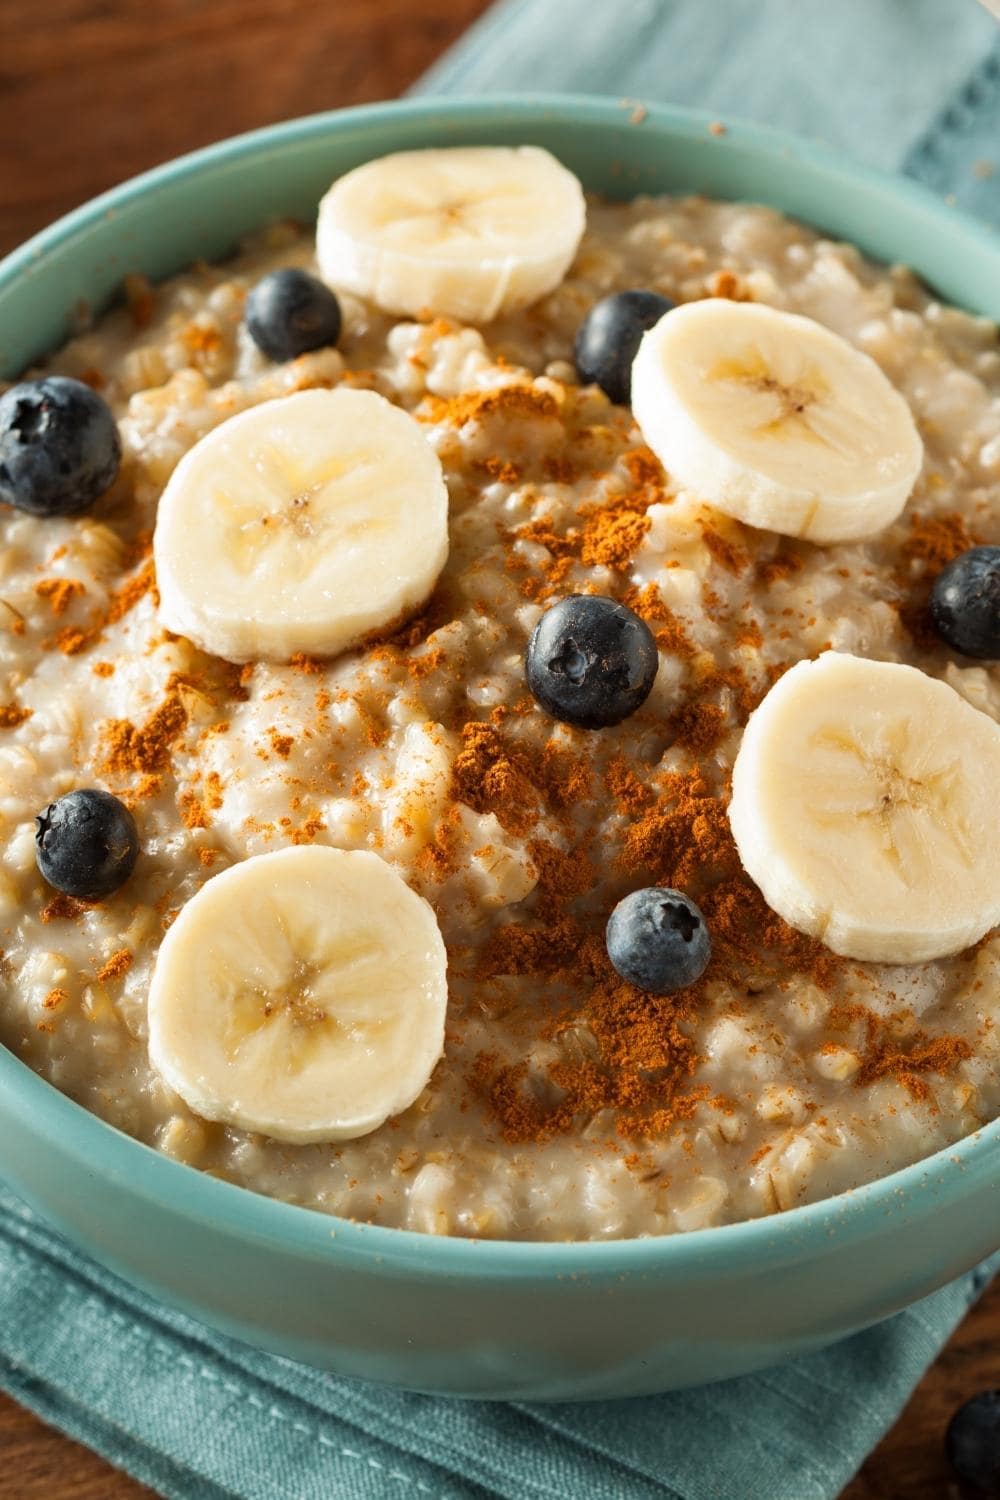 30 Easy Recipes with Oats You’ll Love Making – Insanely Good